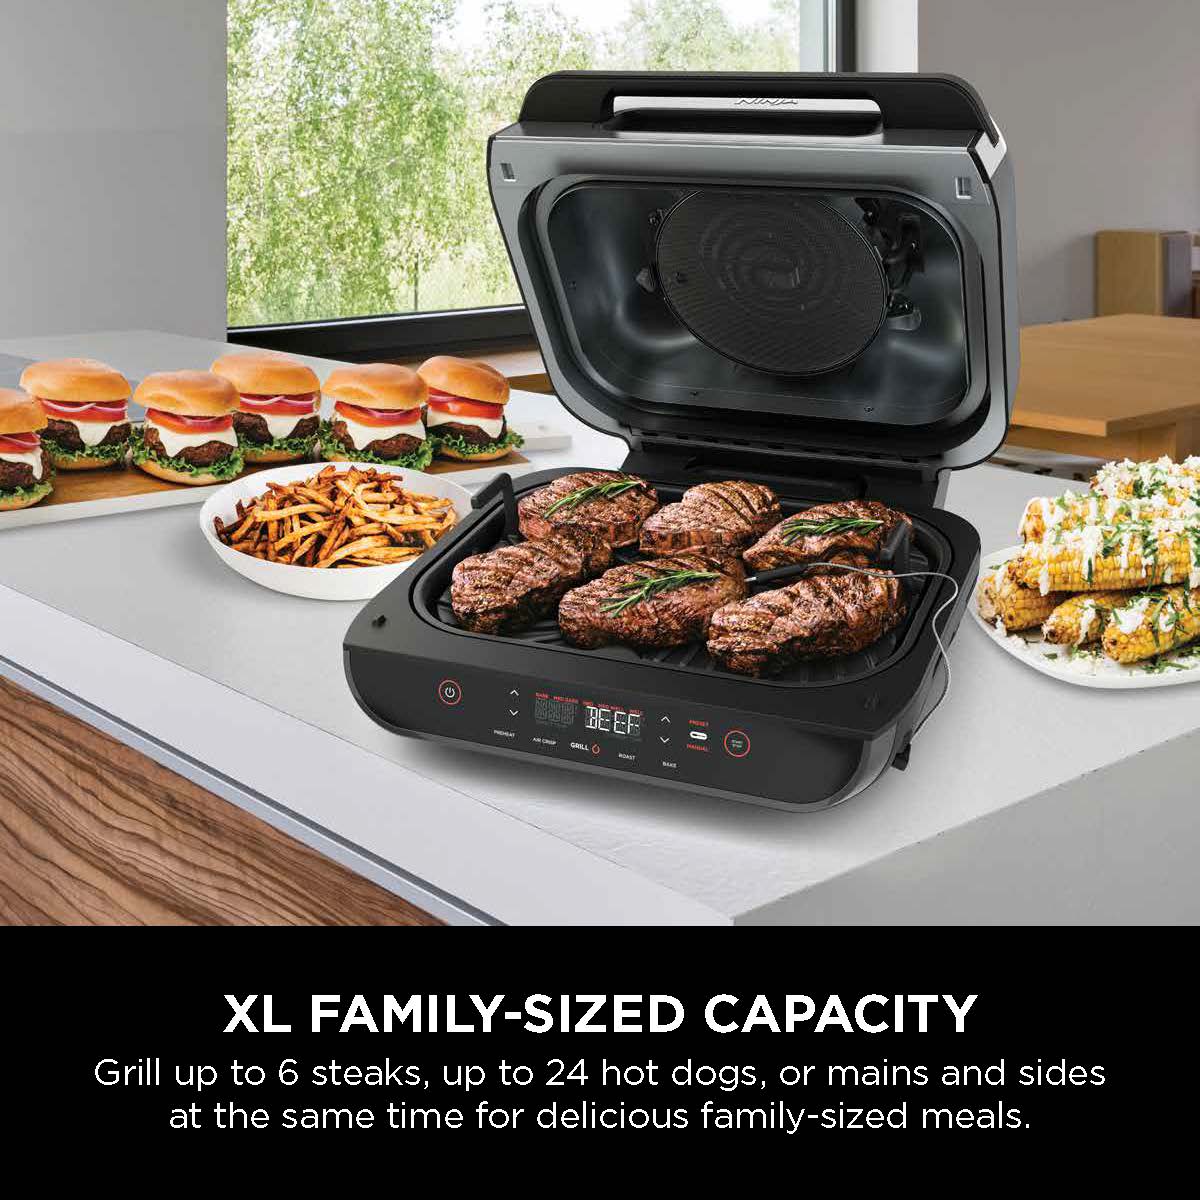 https://themarketdepot.com/wp-content/uploads/2023/01/Ninja%C2%AE-Foodi%E2%84%A2-Smart-XL-4-in-1-Indoor-Grill-with-4-qt-Air-Fryer-Roast-and-Bake-FG550-2.jpeg